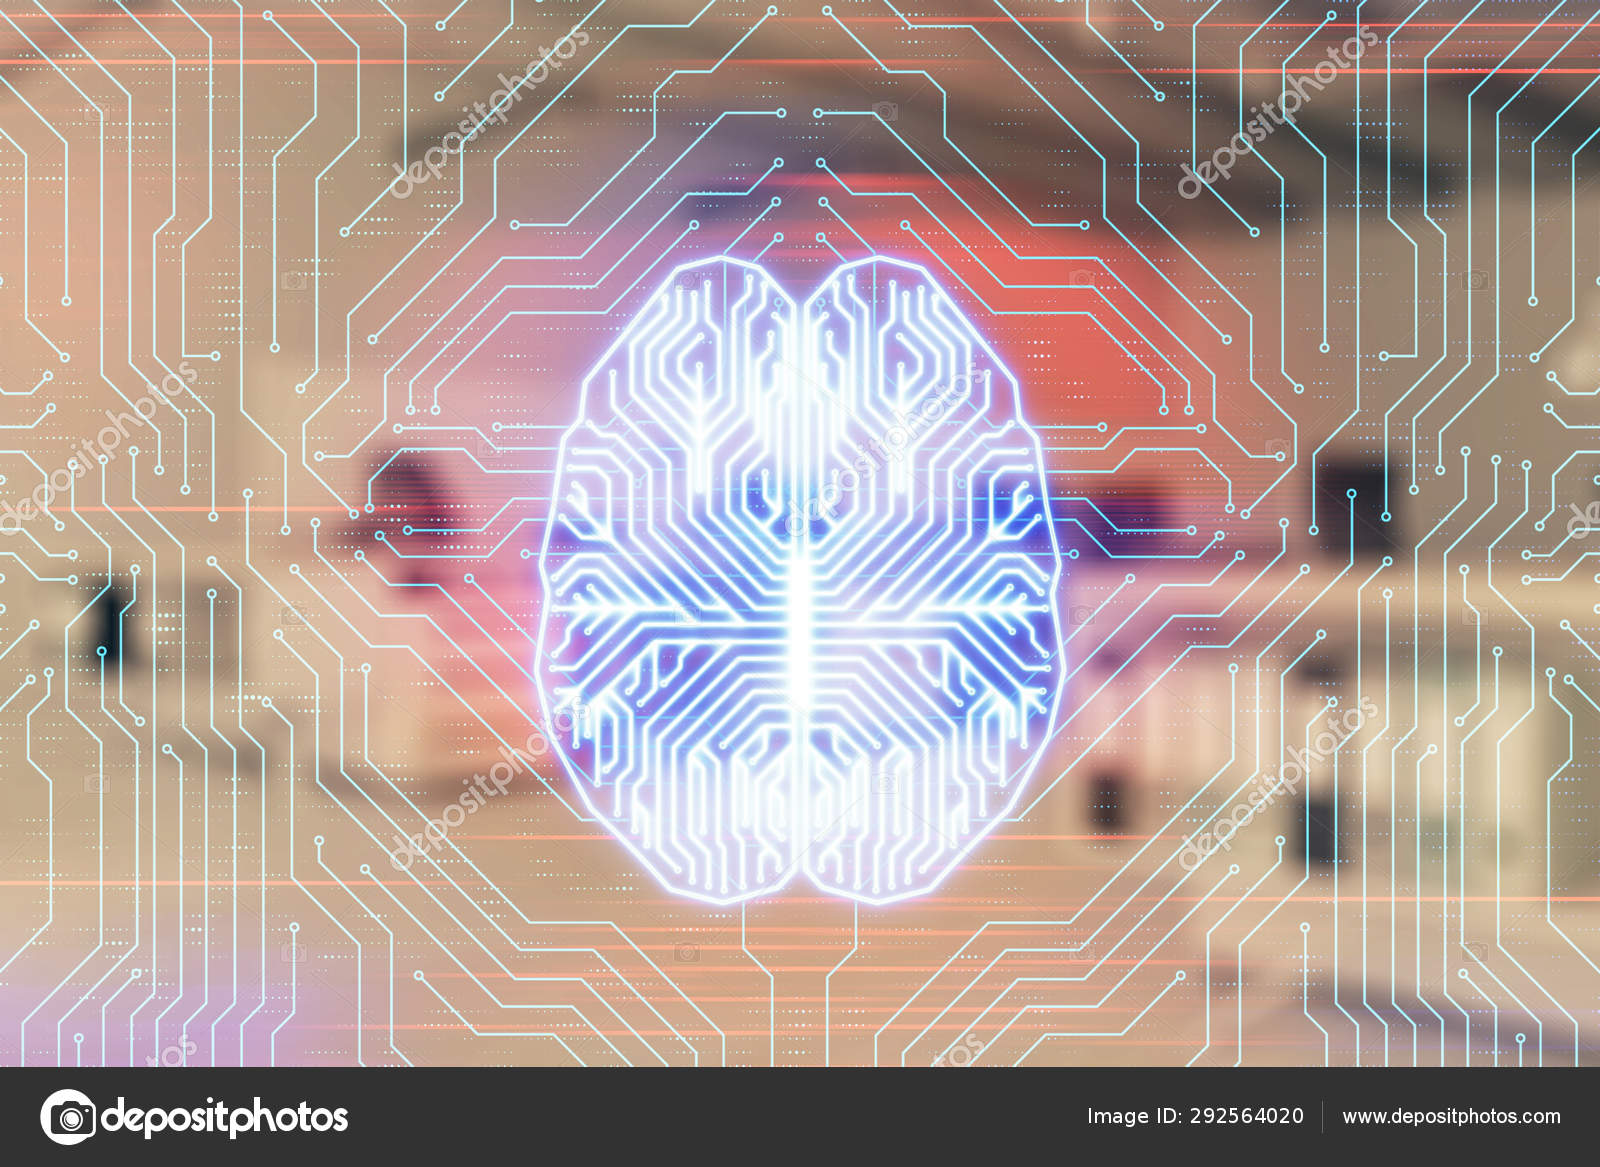 Human Brain Drawing With Office Interior On Background